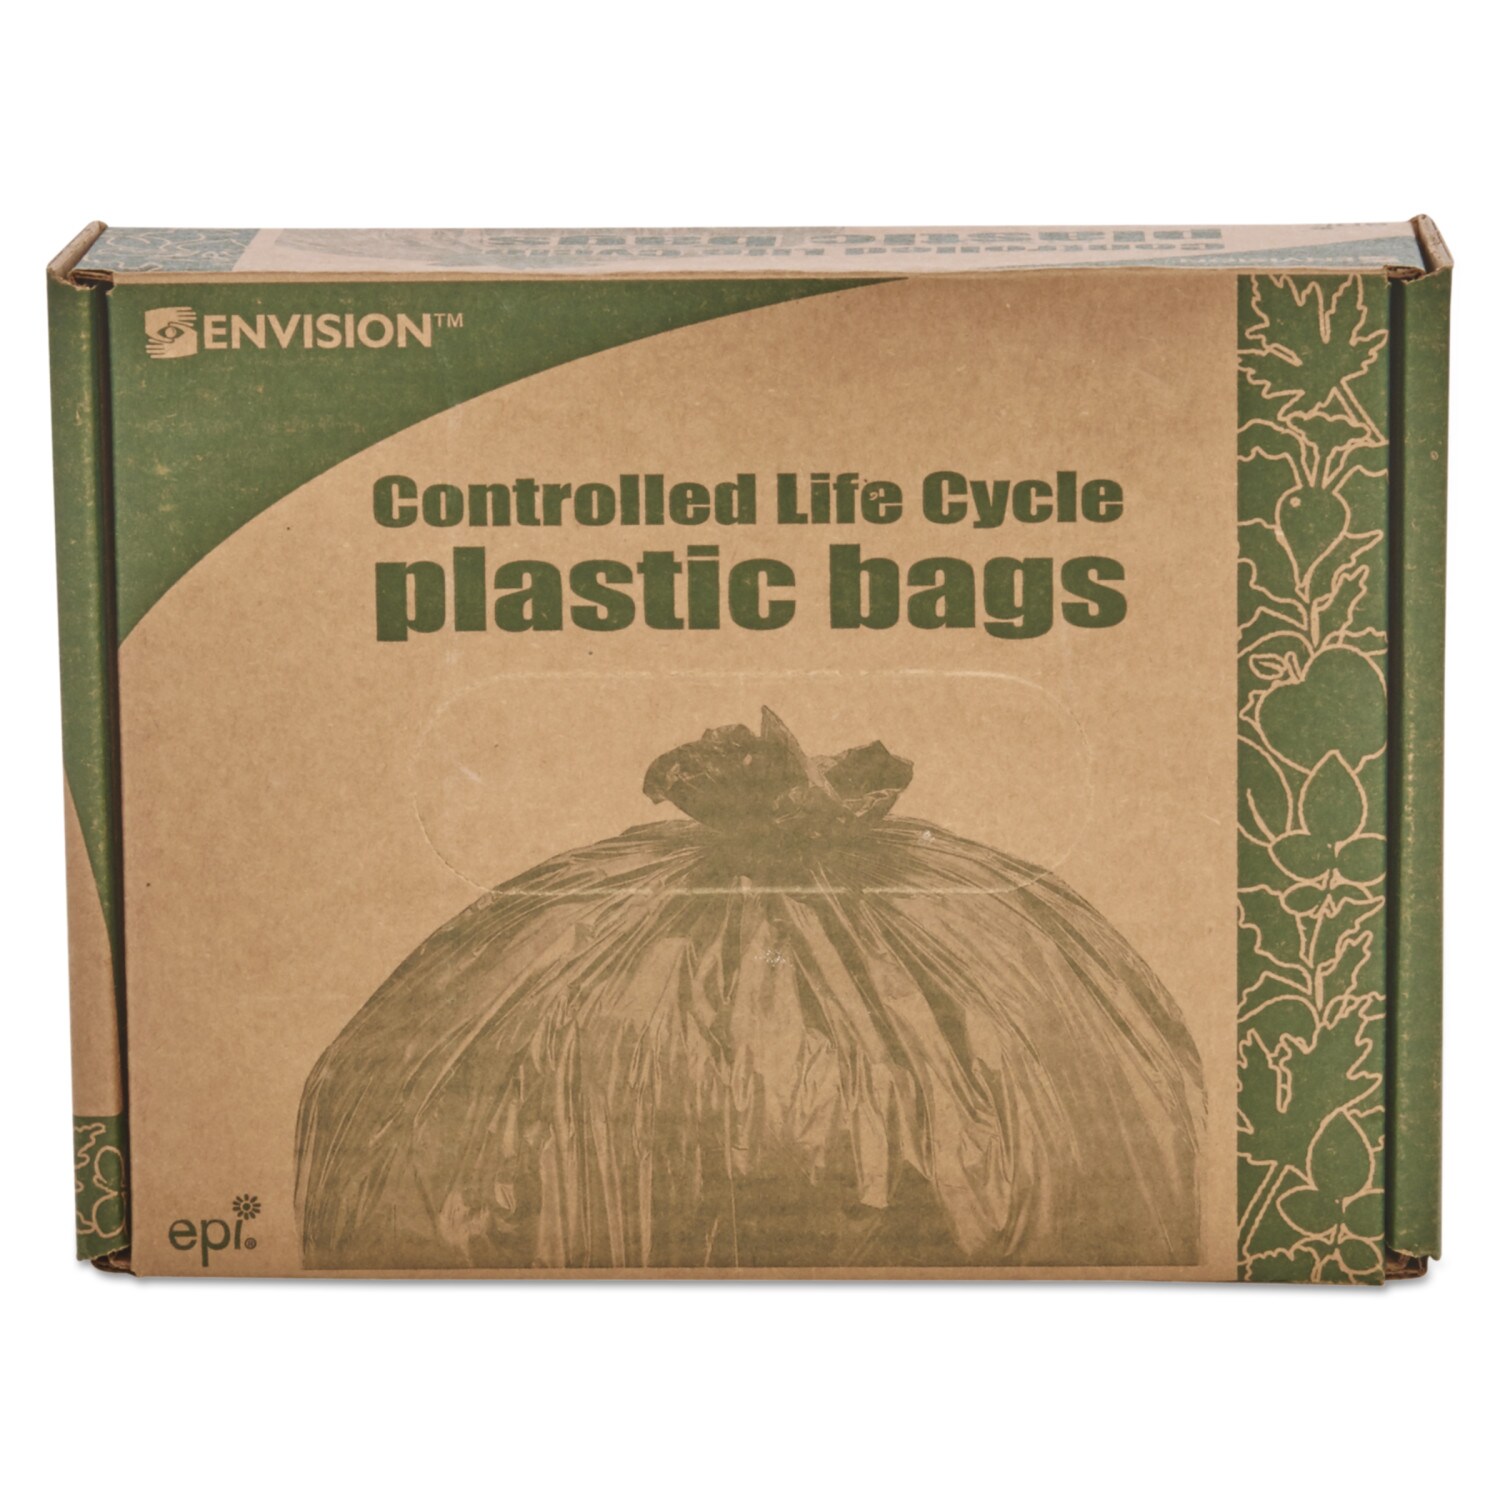 STOUT by Envision T2424B10 Total Recycled Content Bags 100% Recyled Plastic Pack of 250 Brown/Black 7-10 gal Capacity 1.0 mil Thickness 24 x 24 